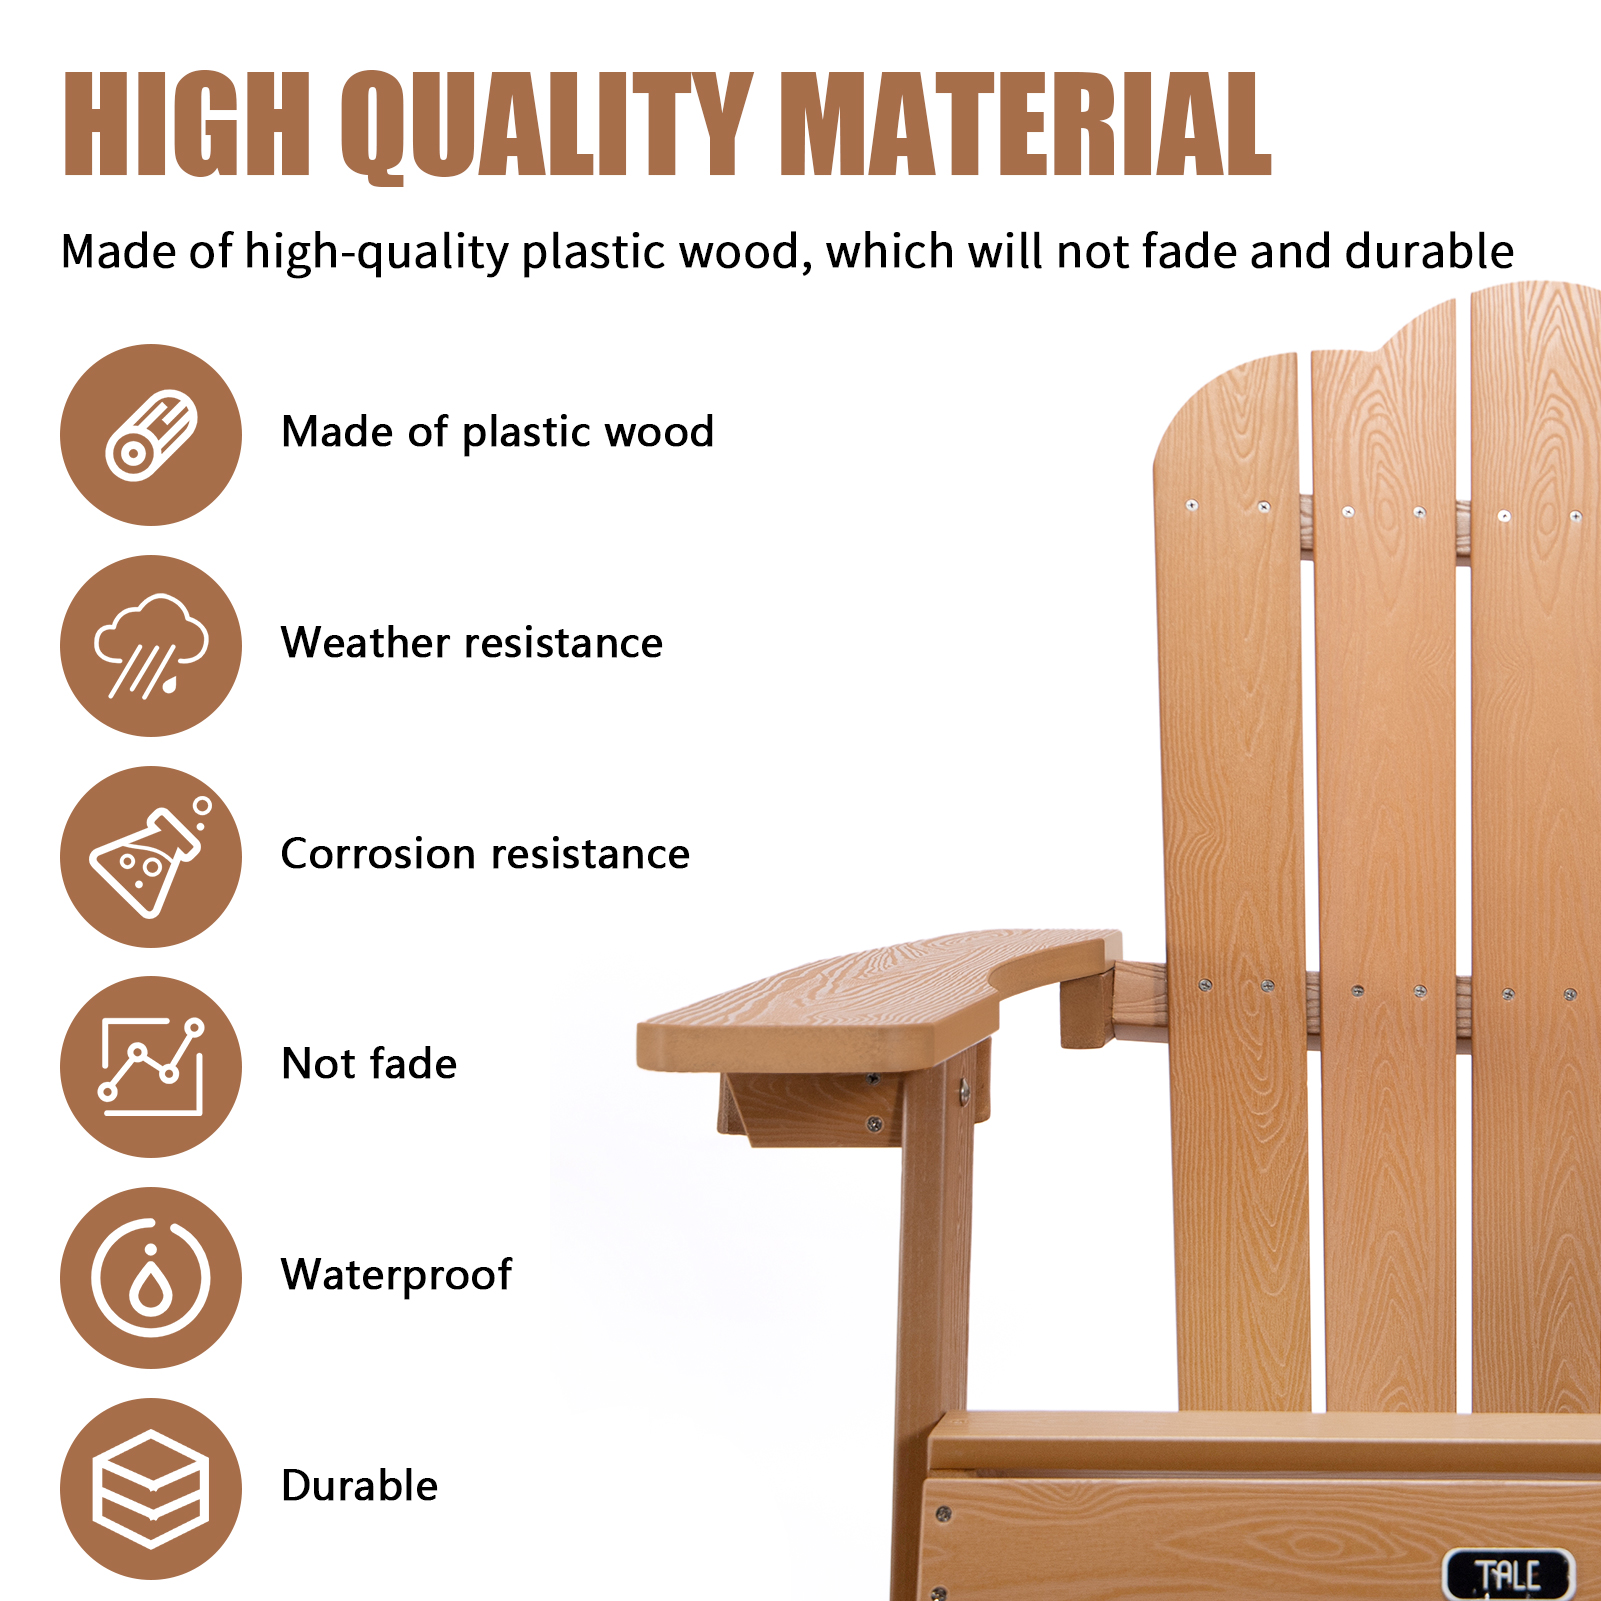 Folding Adirondack Chair, Plastic Wooden Lounge Chairs for Yard, Garden, Patio - image 4 of 7